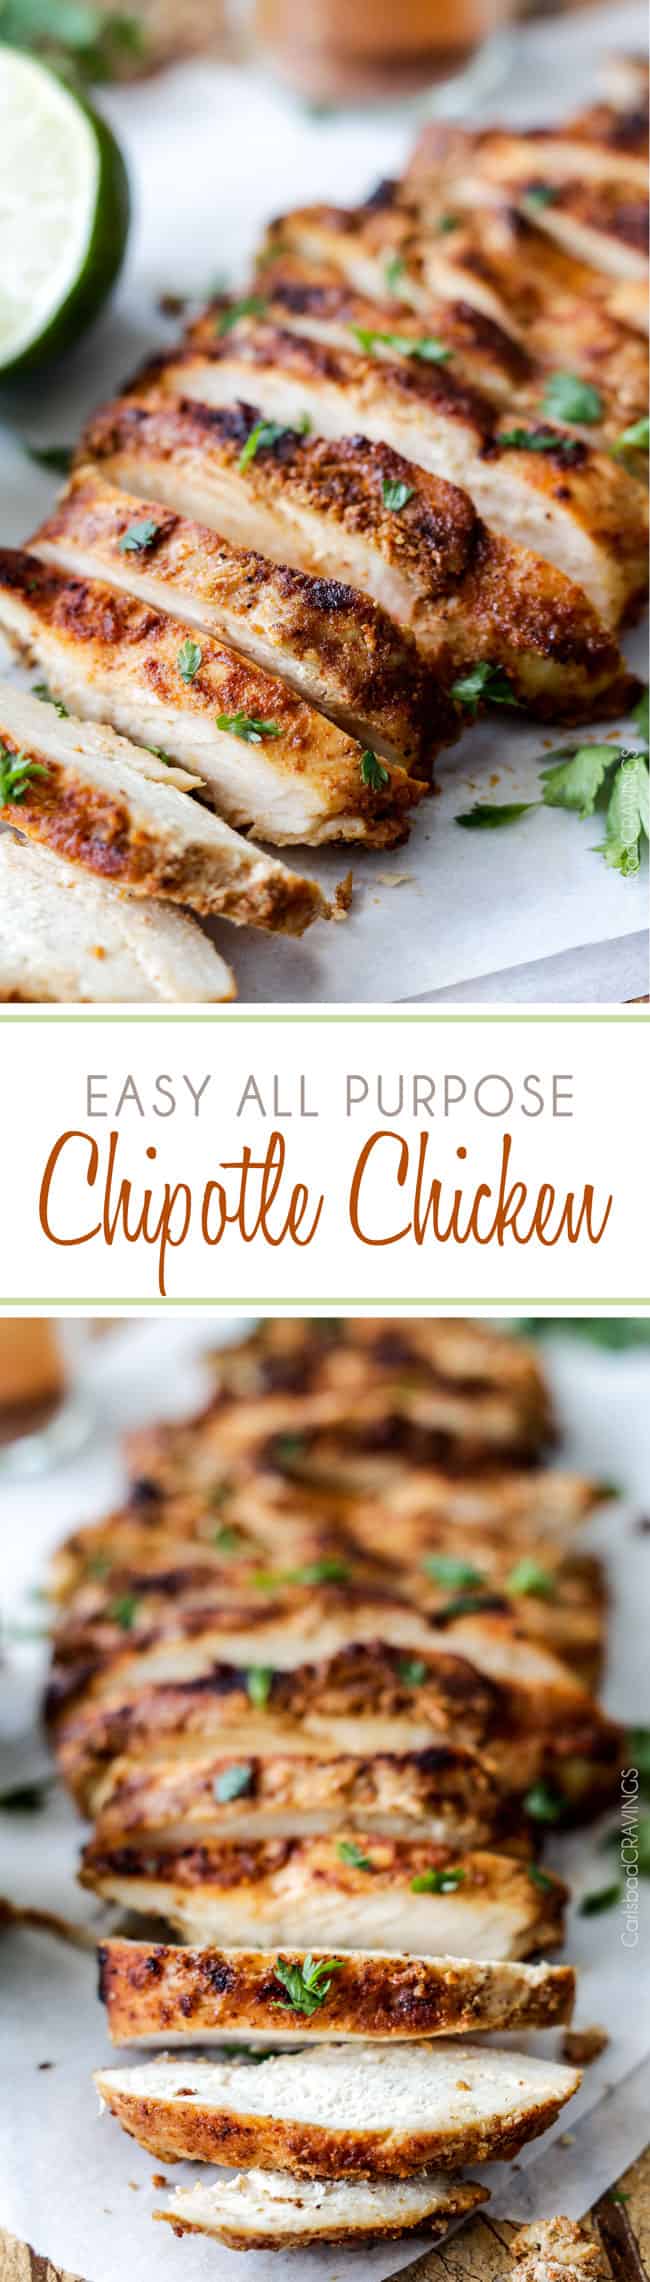 Easy All Purpose Chipotle Chicken - Carlsbad Cravings